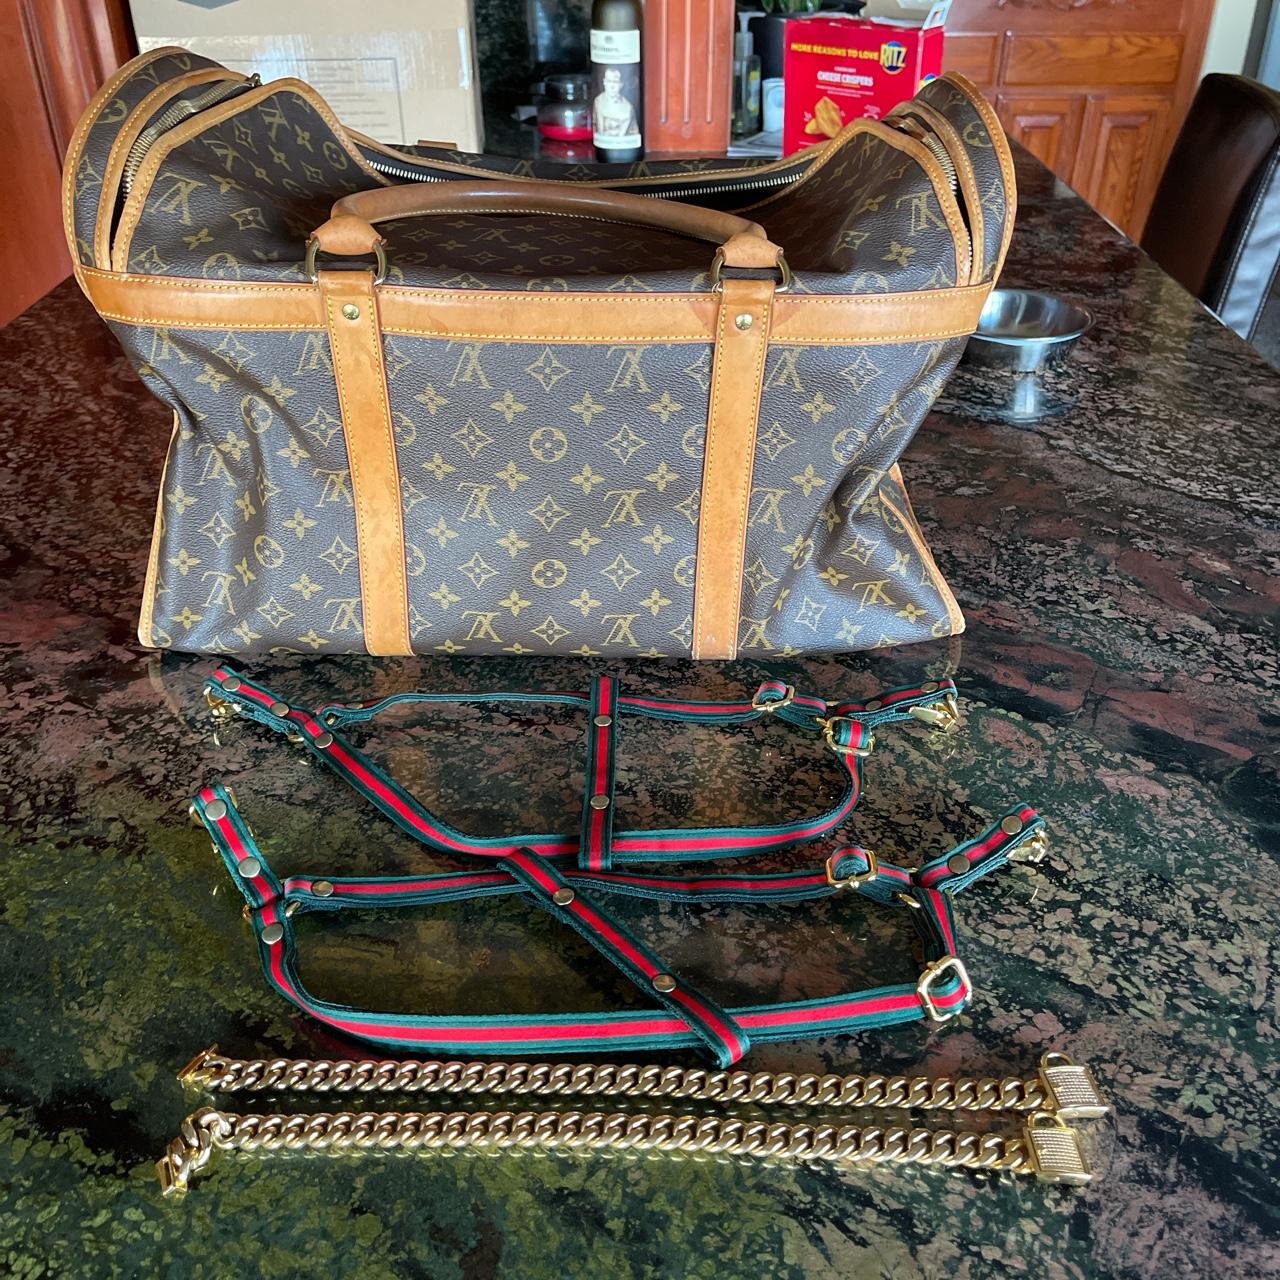 Authentic Louis Vuitton dog carrier Was used for - Depop